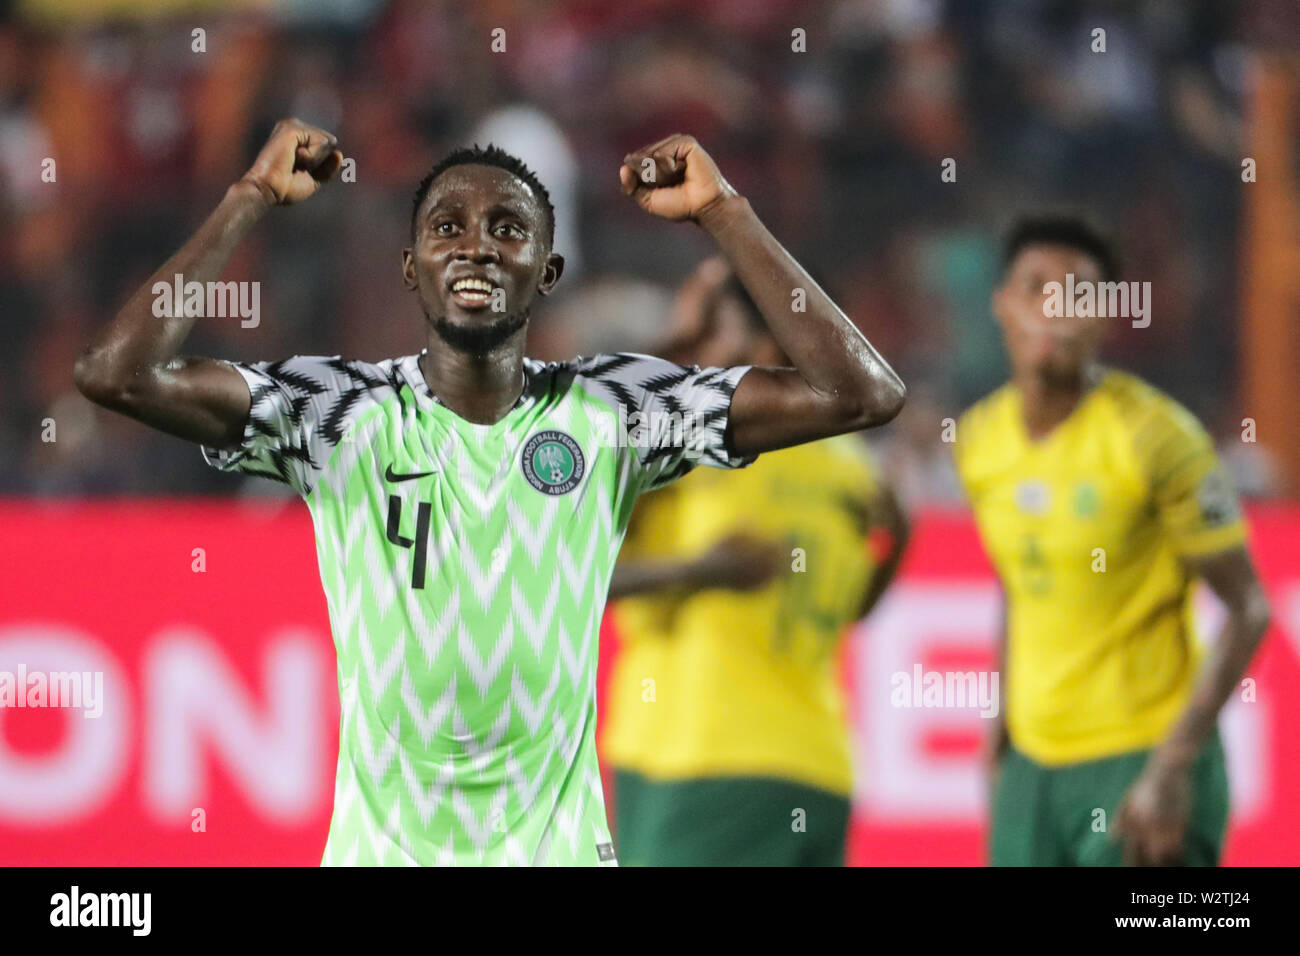 10 July 2019, Egypt, Cairo: Nigeria's Wilfred Ndidi celebrates his team's victory after the 2019 Africa Cup of Nations quarter final soccer match between Nigeria and South Africa at the Cairo International Stadium. Photo: Oliver Weiken/dpa Stock Photo